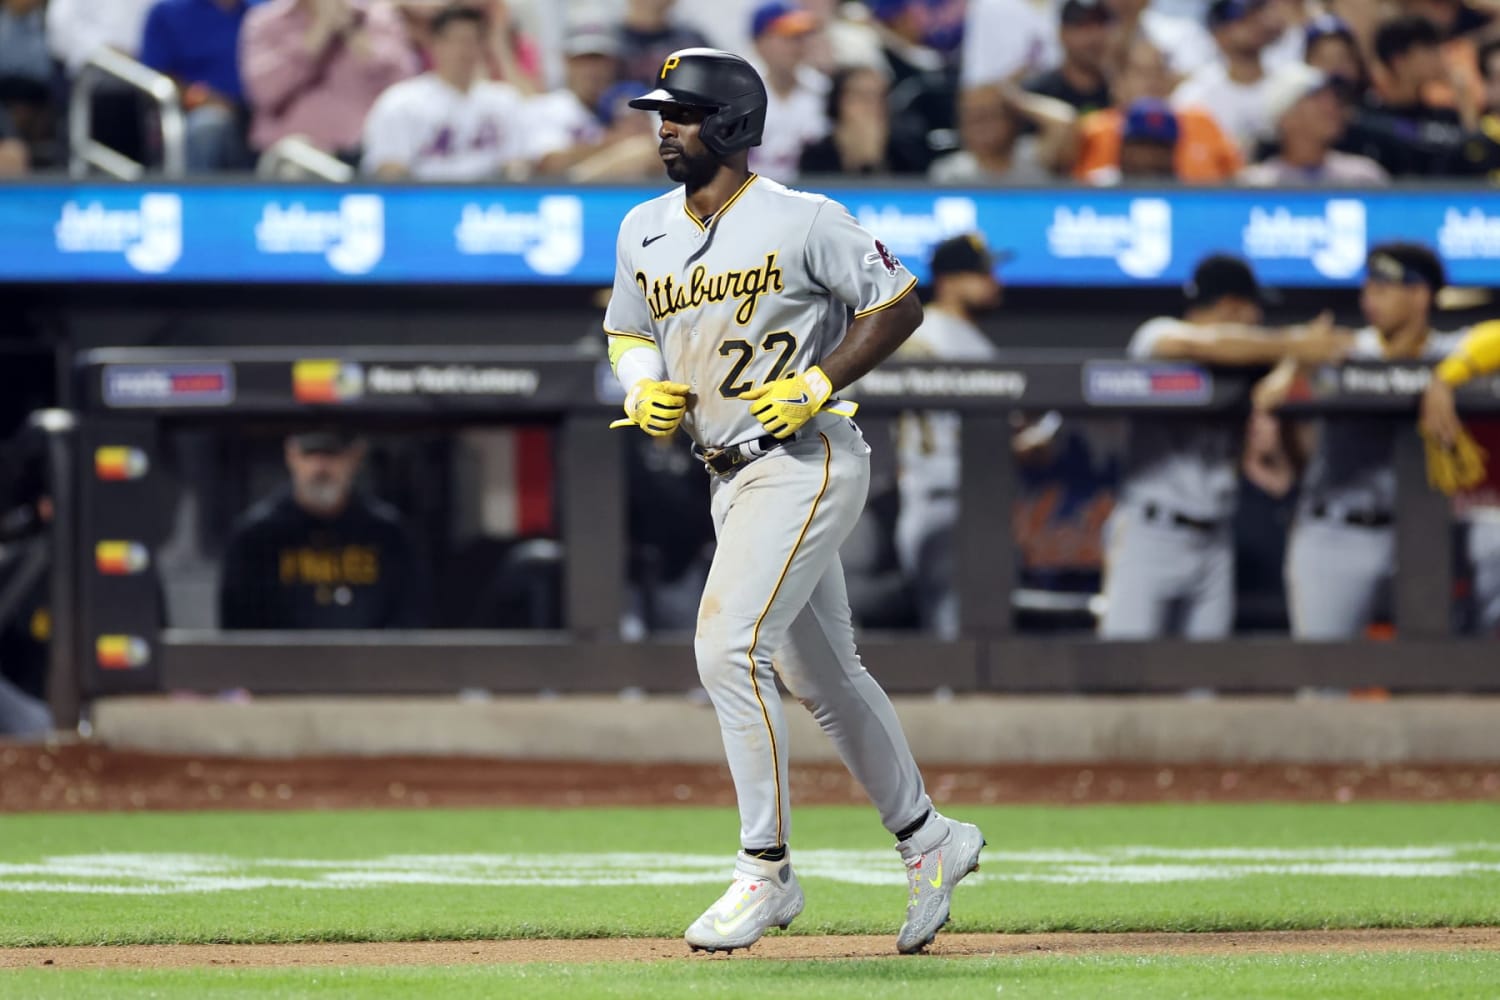 Andrew McCutchen returning to Pirates on 1-year deal - ESPN